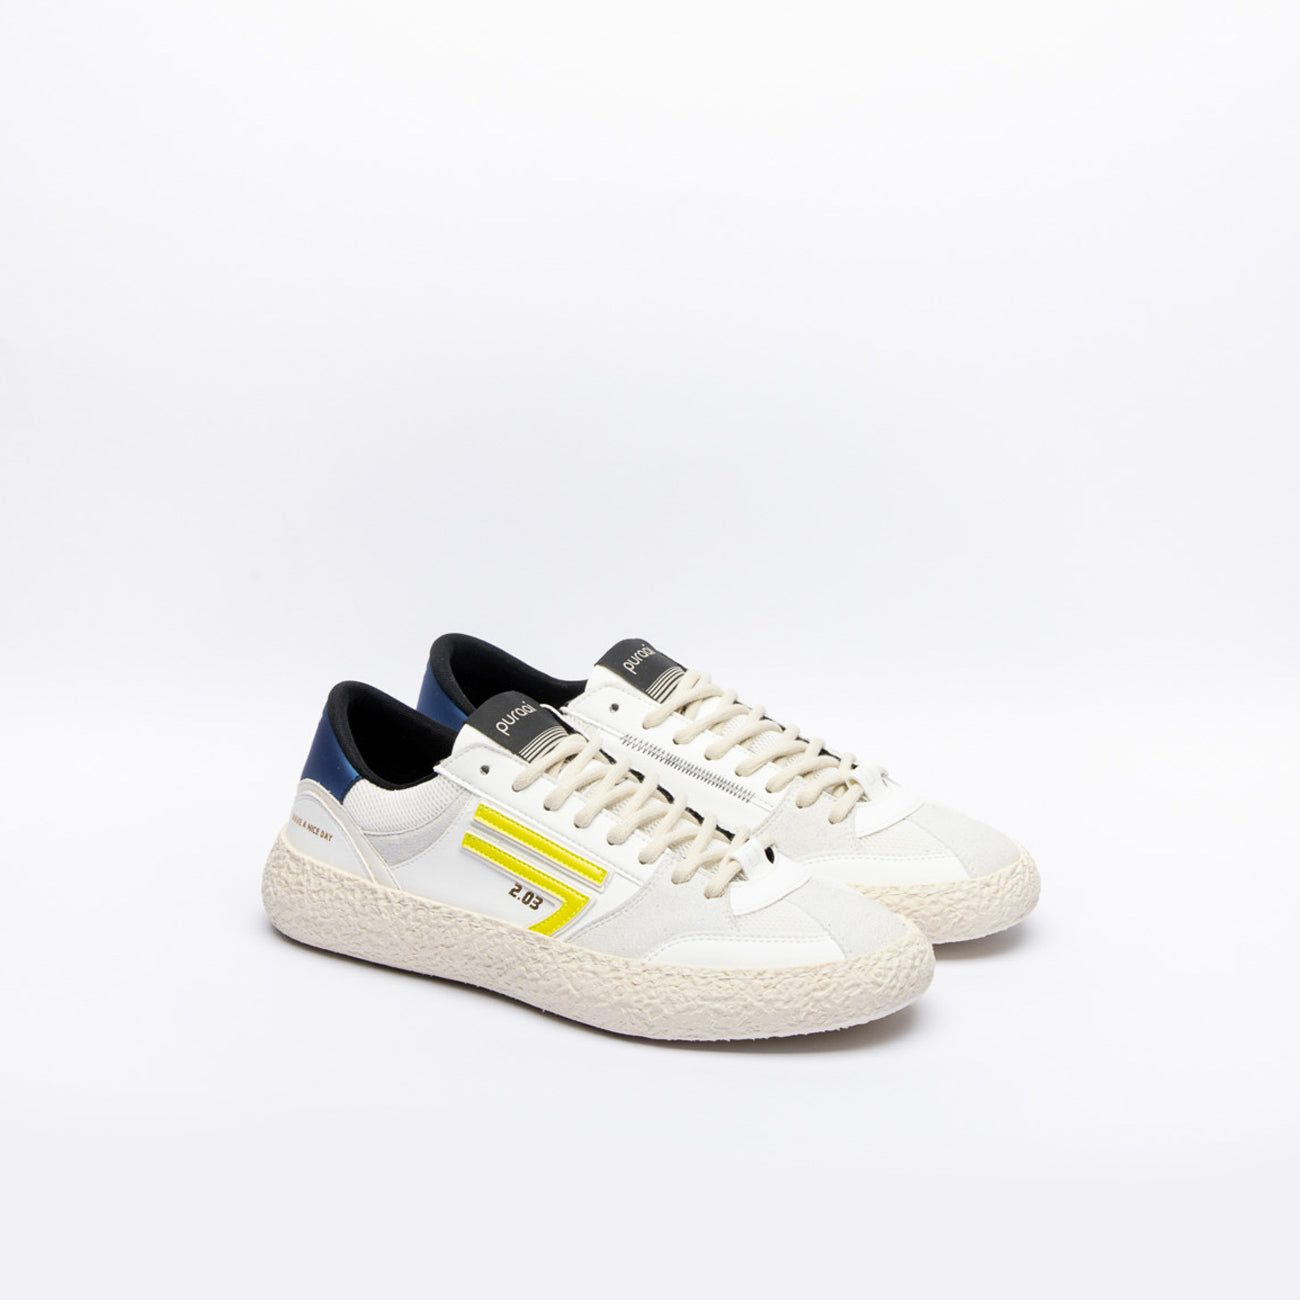 Puraai Lime eco-sustainable sneakers in white fabric with yellow logo.